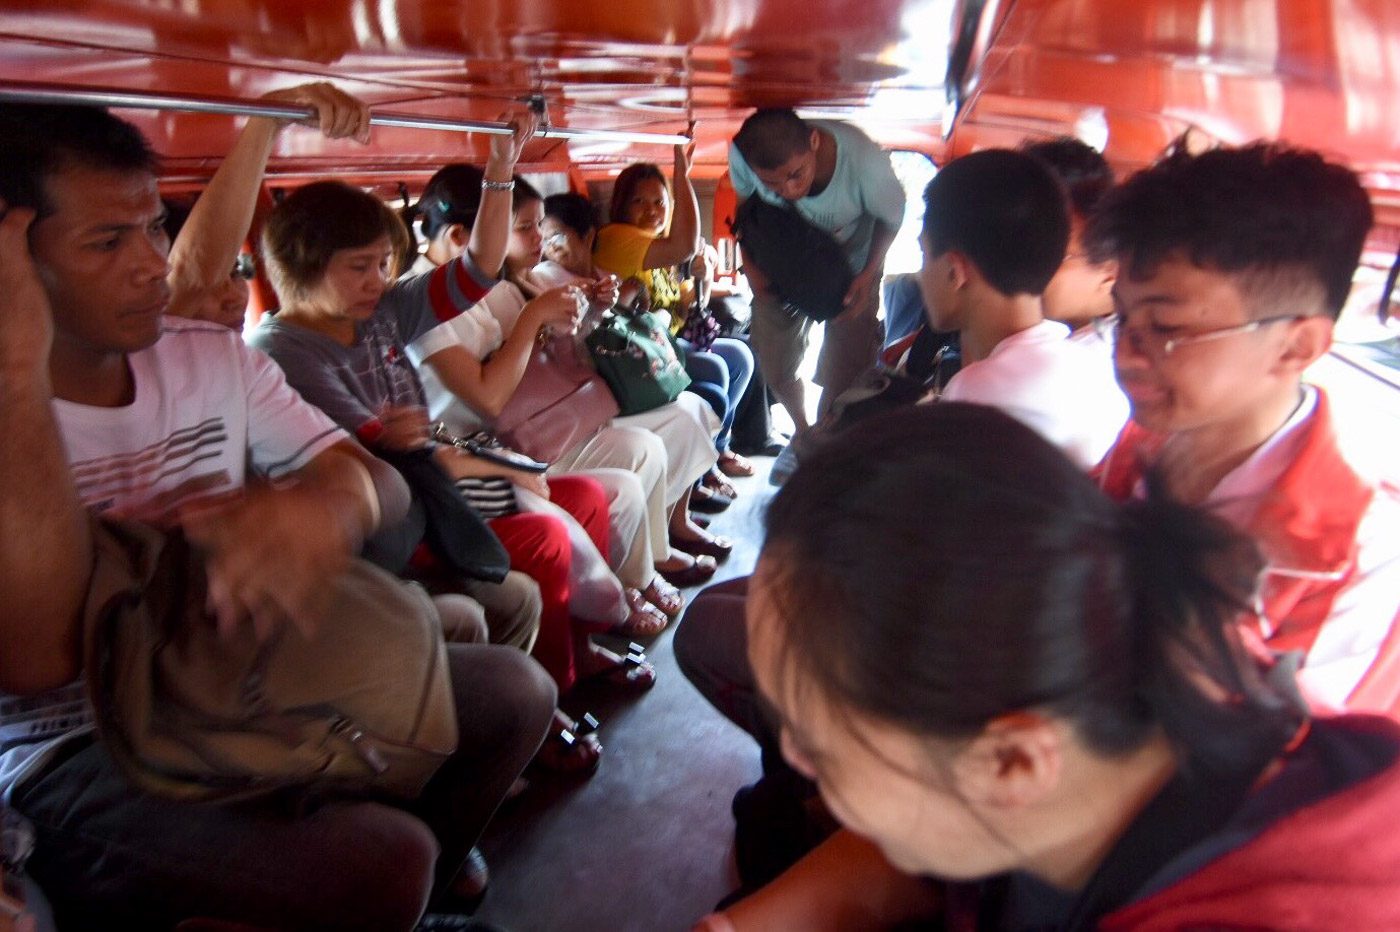 LTFRB exec warns of inflationary effects of P10 jeepney minimum fare